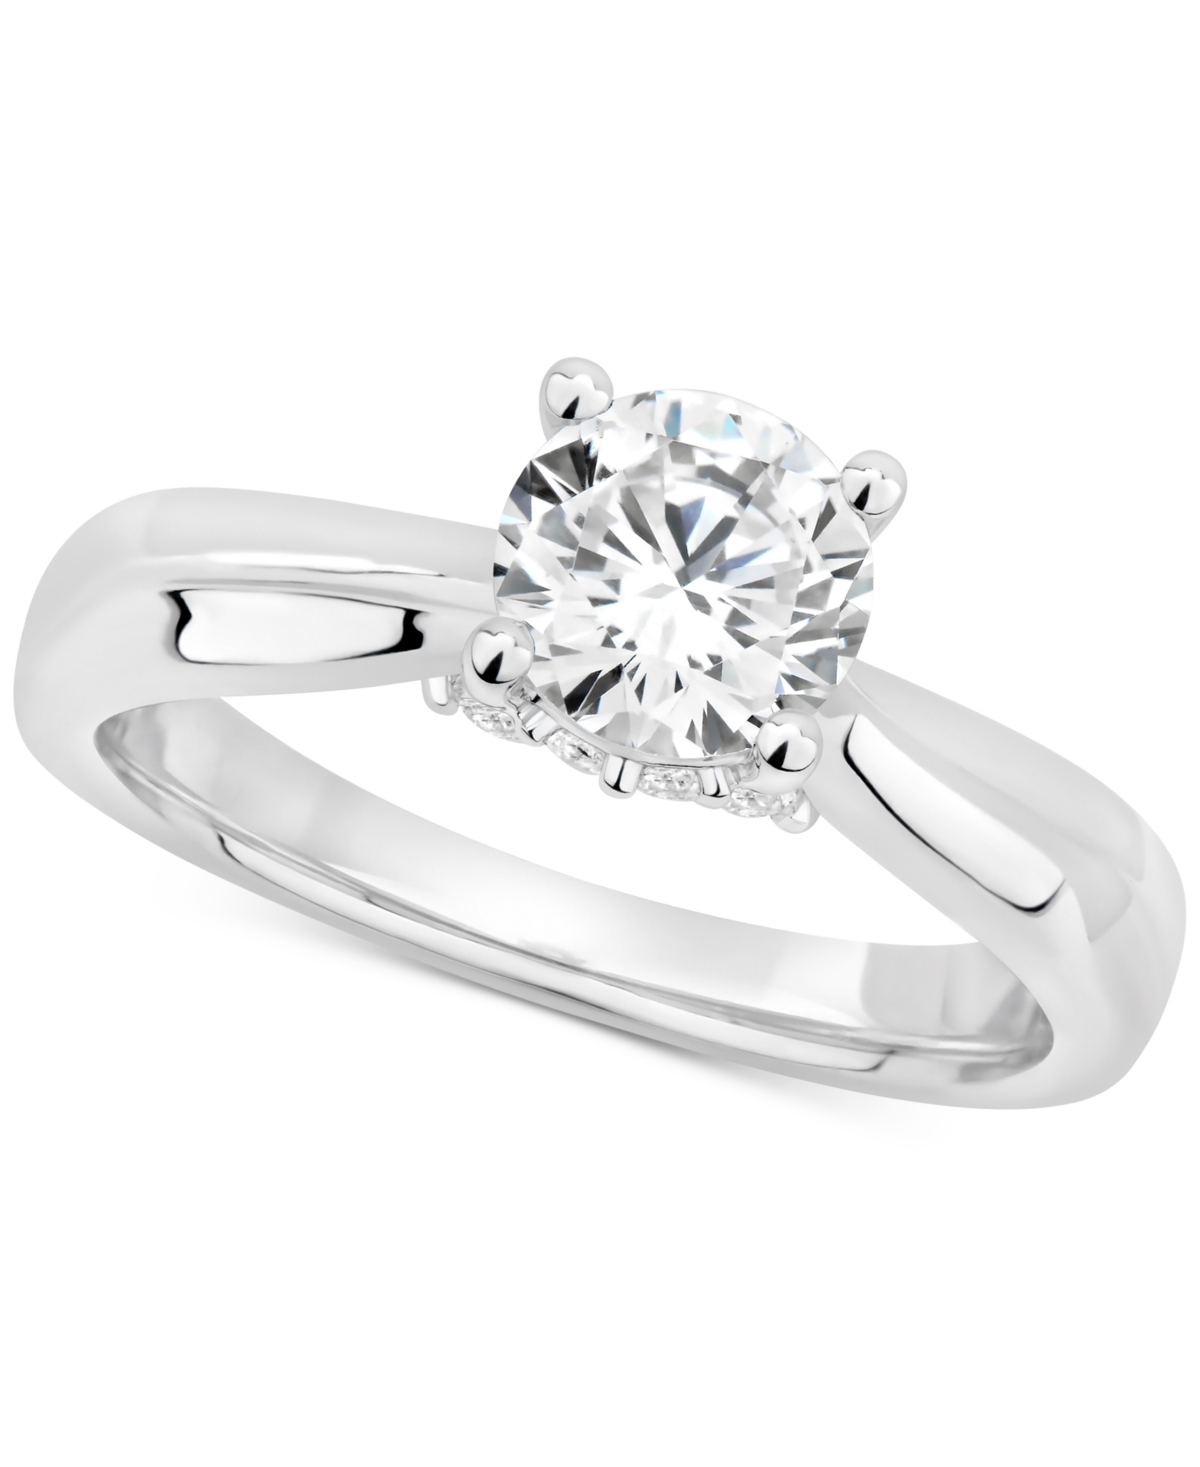 Gia Certified Diamond Solitaire Engagement Ring (1-1/2 ct. t.w.) in 14k White Gold - White Gold